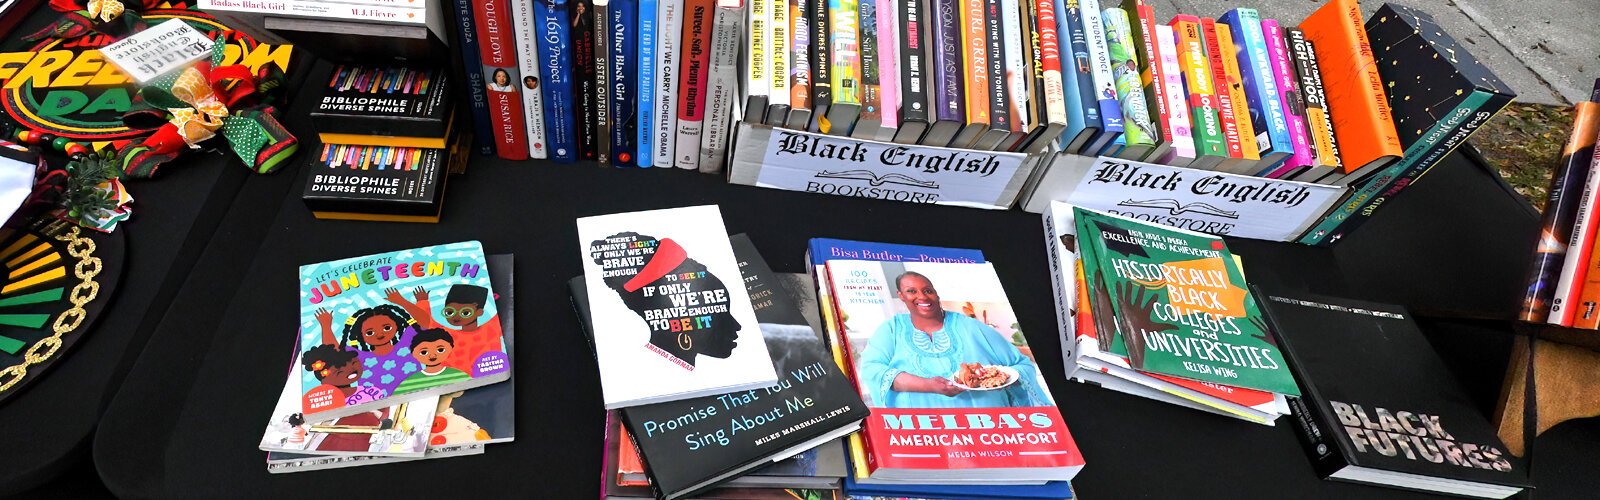  Books on Black history and by Black authors are on display for purchase at the Juneteenth festival in Lykes Gaslight Park in Tampa.